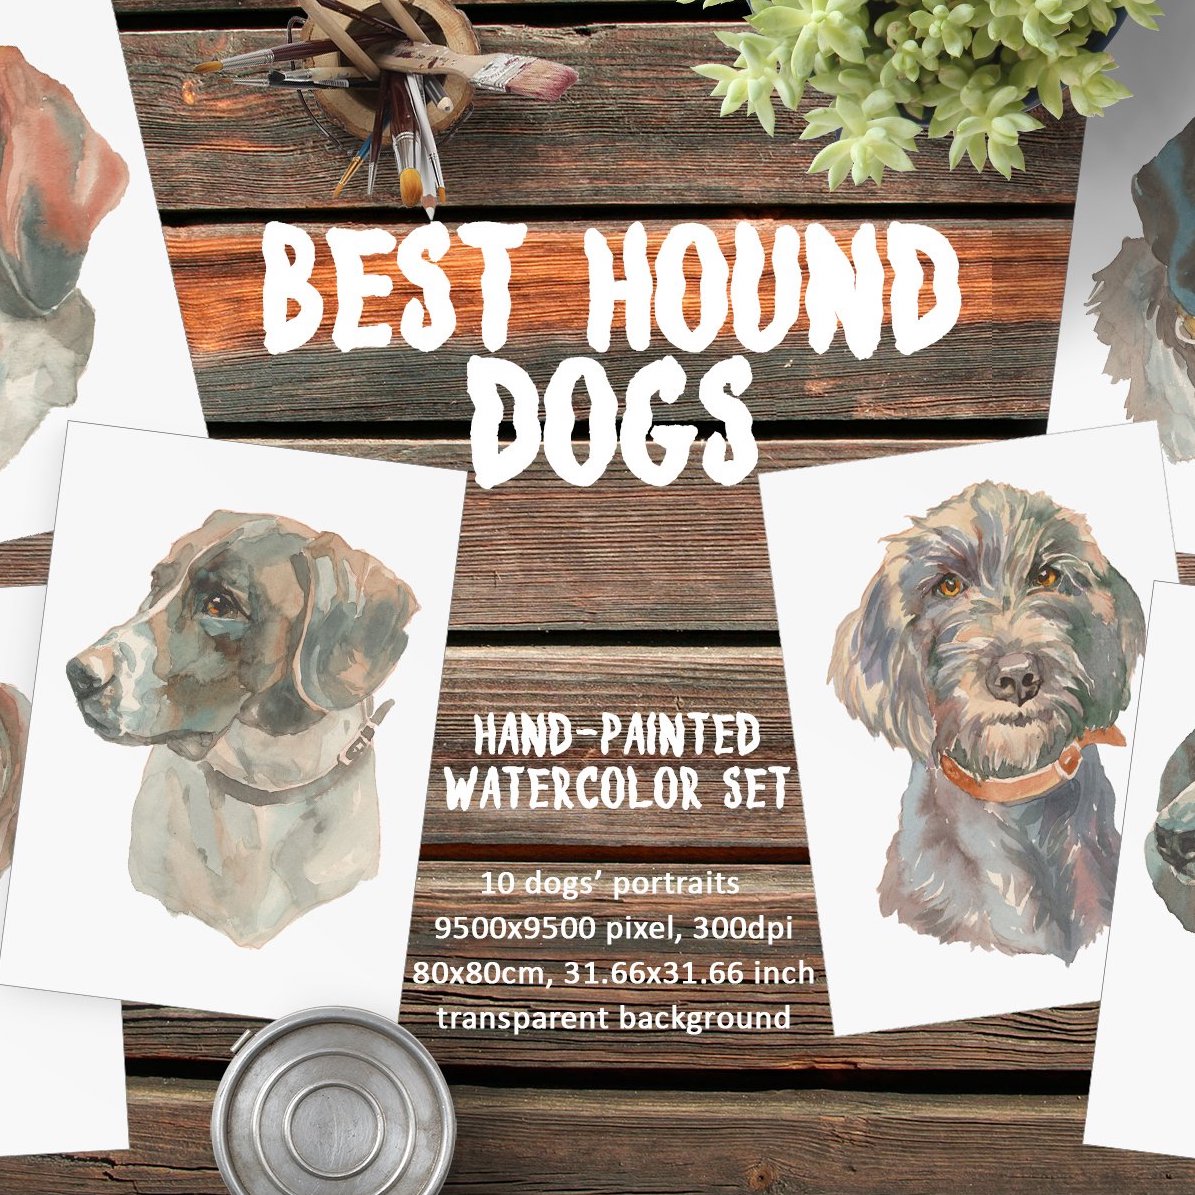 best hound dogs cover image.